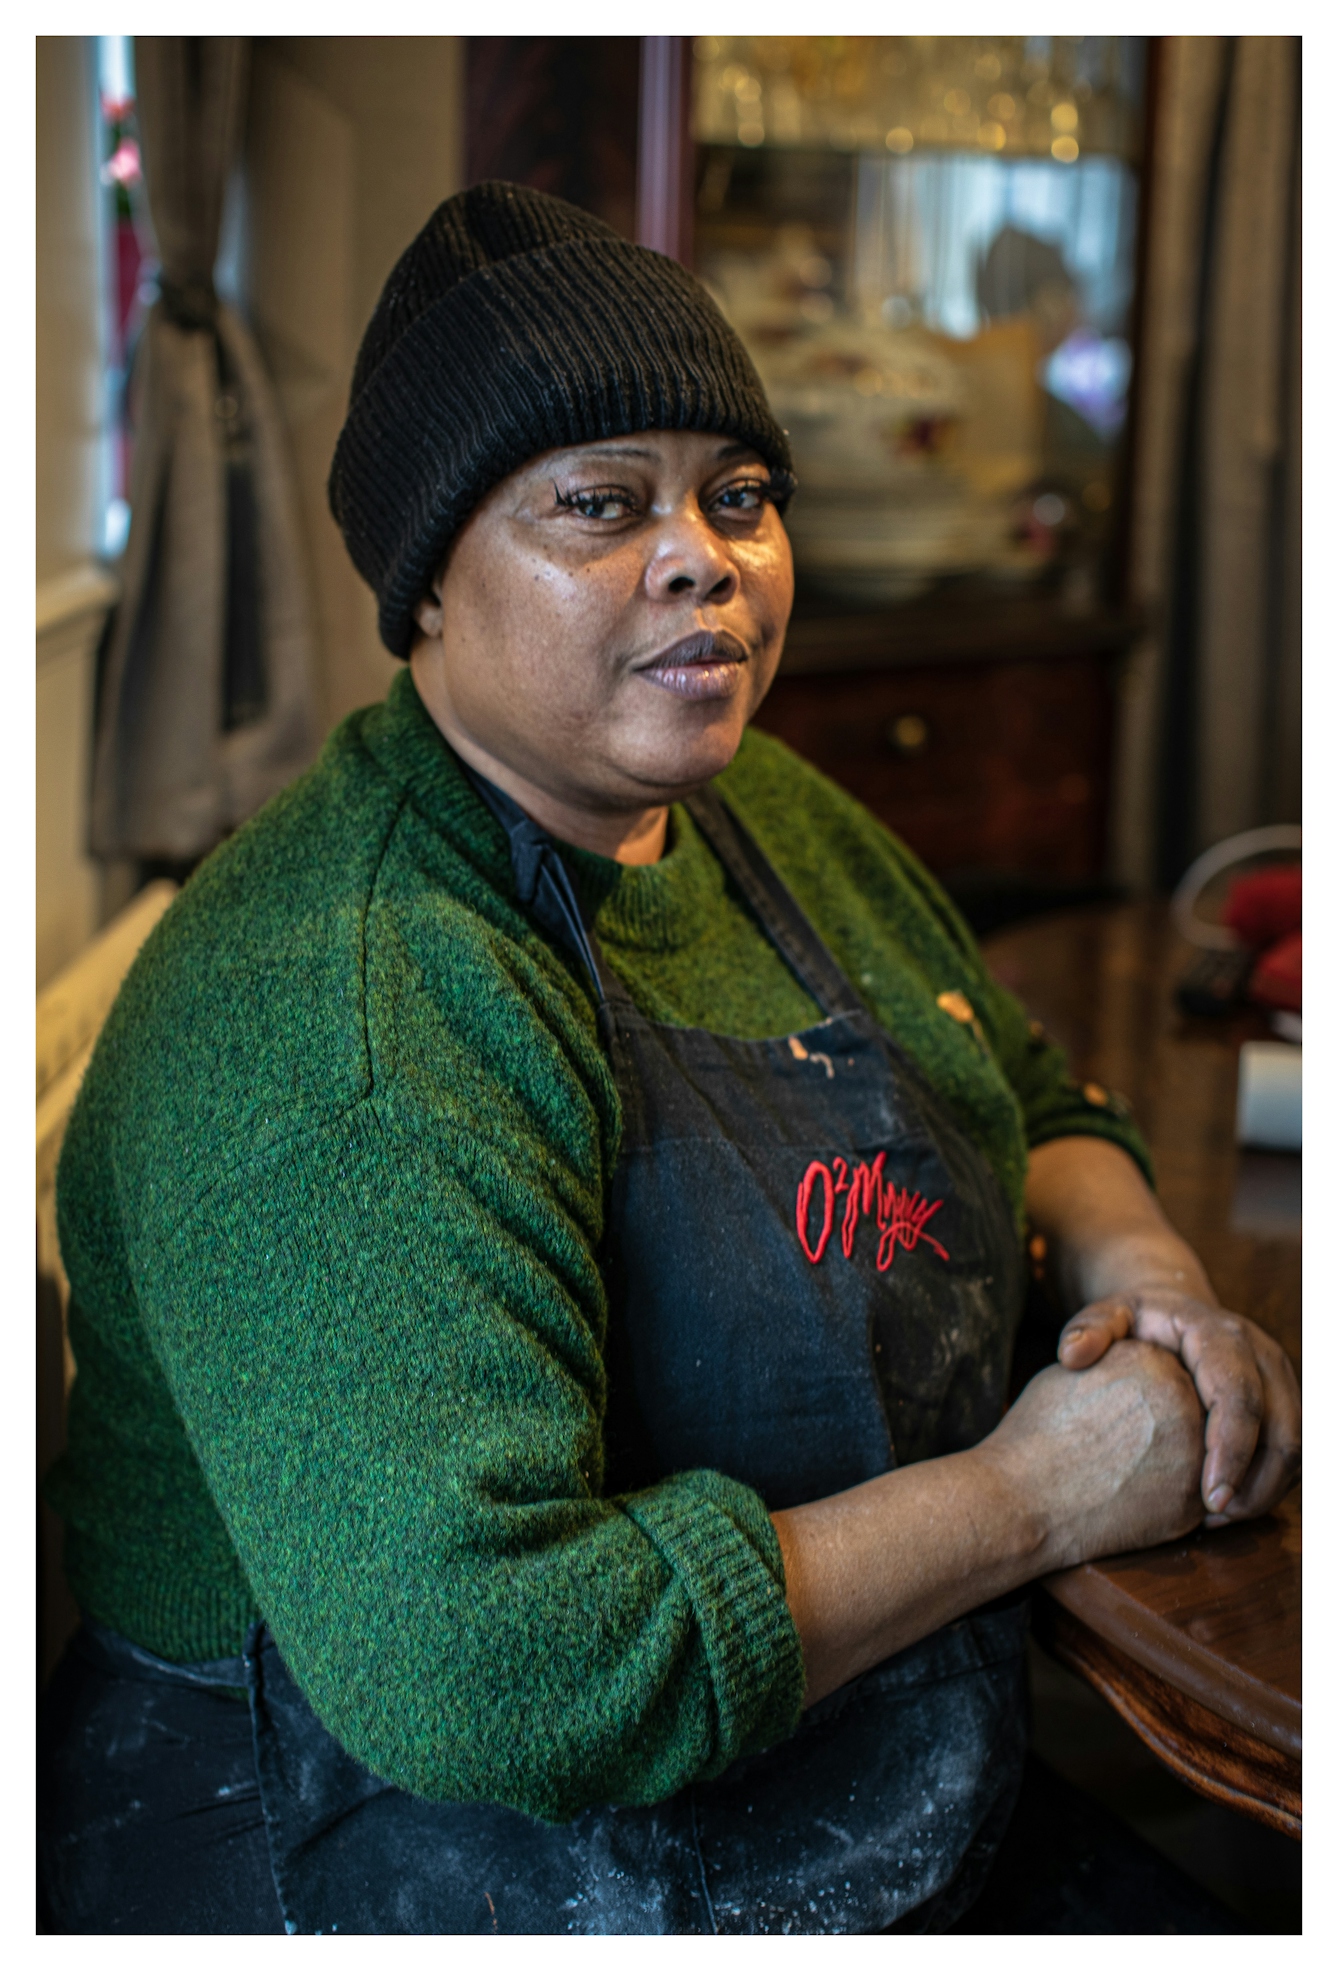 Photographic portrait of a Black woman seating at a table indoors. She is wearing a green knitted jumper, a black wooly hat and a cooking apron. Her hands are gently clasped together on the tabletop. She is looking straight to camera with a strong, quiet but confident expression.